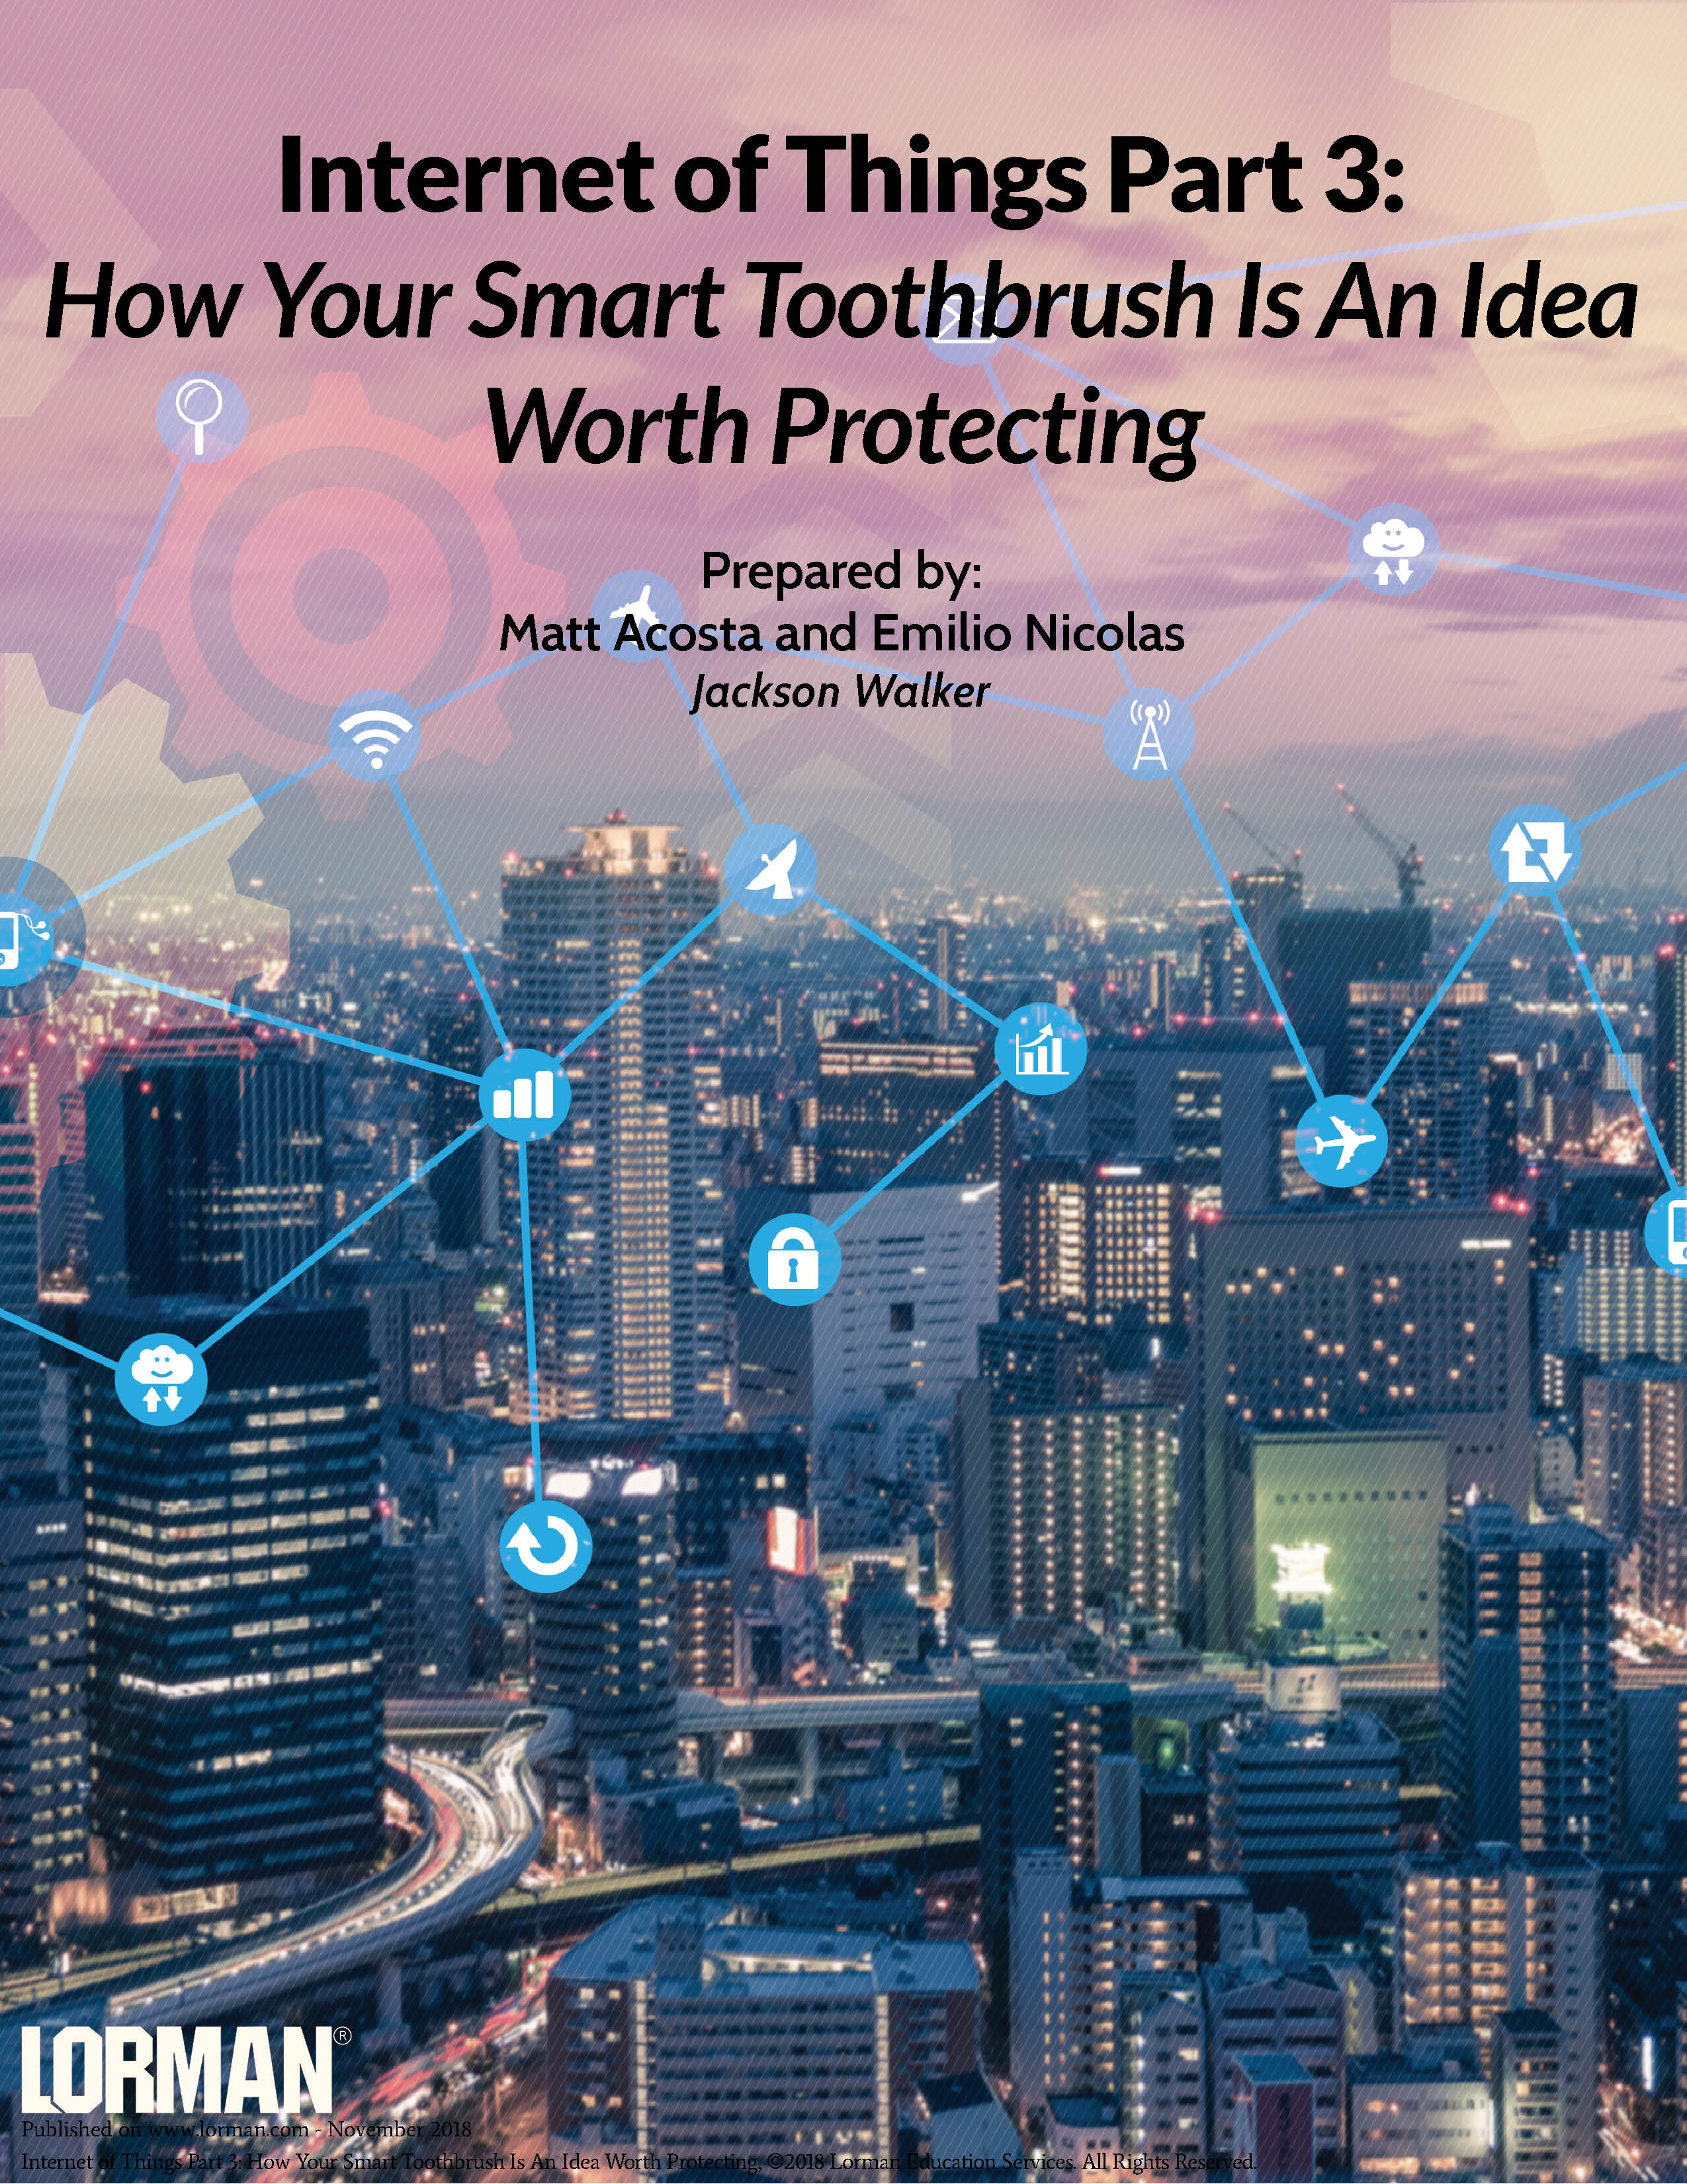 Internet of Things Part 3: How Your Smart Toothbrush Is An Idea Worth Protecting